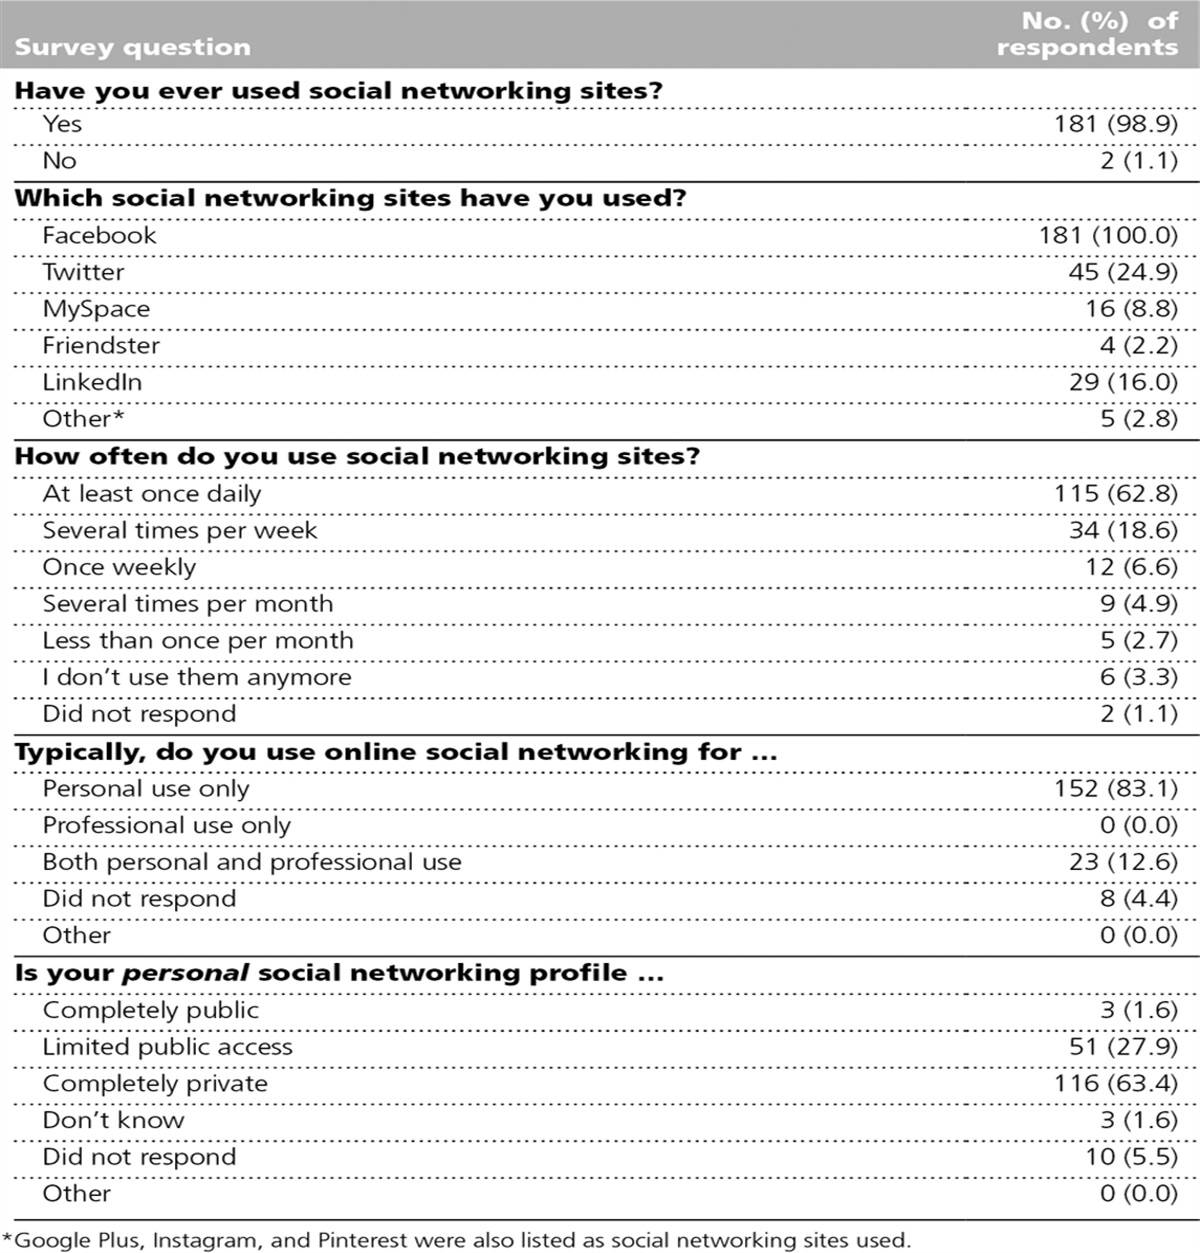 The Influence of the Residency Application Process on the Online Social Networking Behavior of Medical Students: A Single Institutional Study